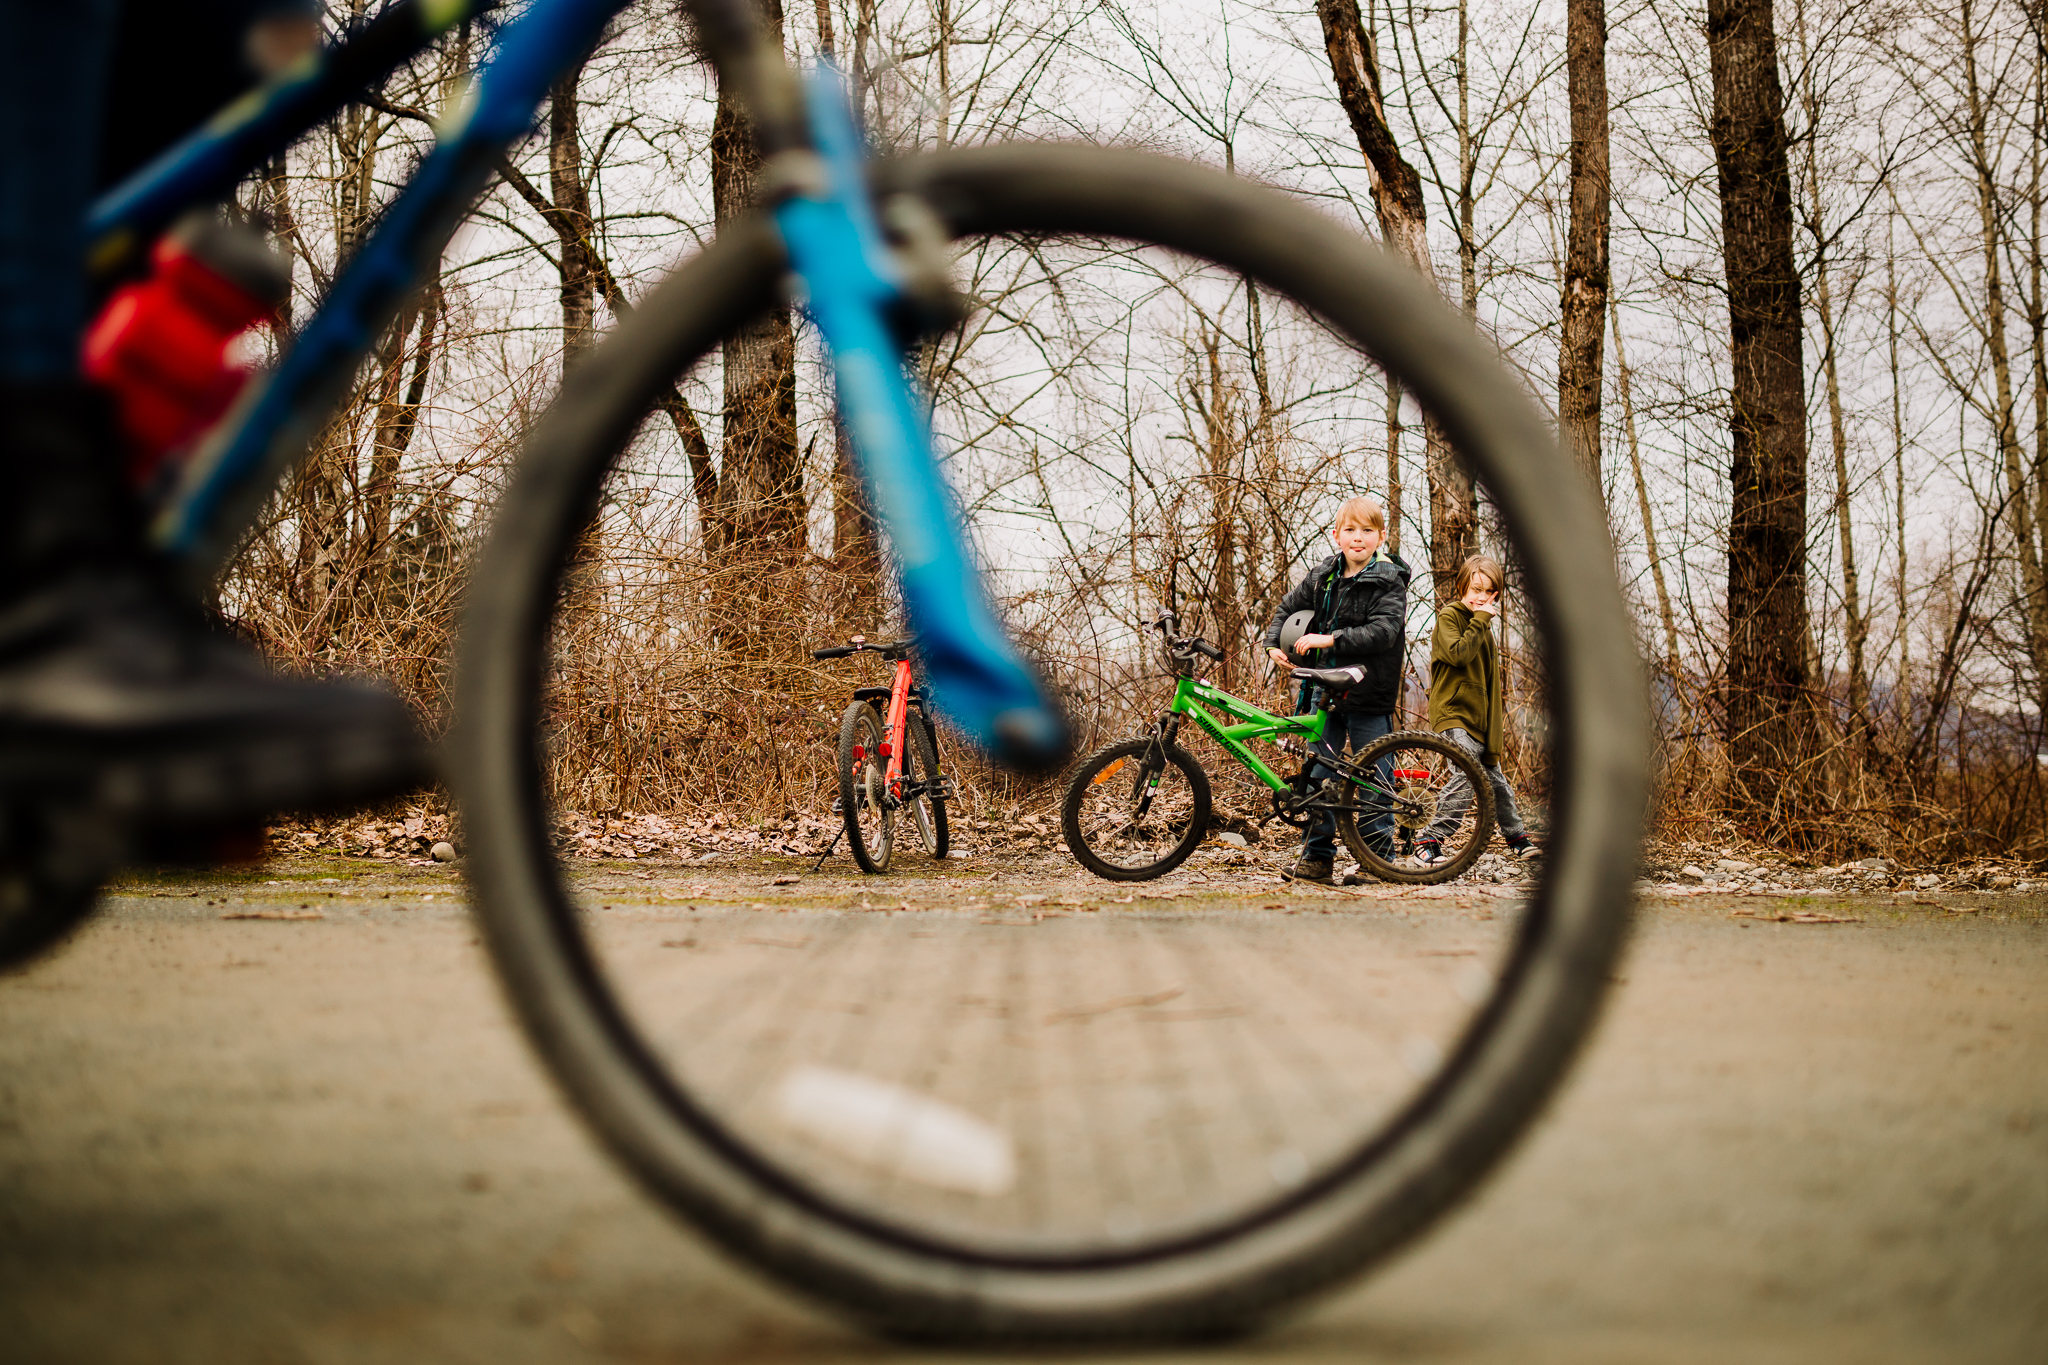 How to use framing to enhance your images - shooting through bike tire